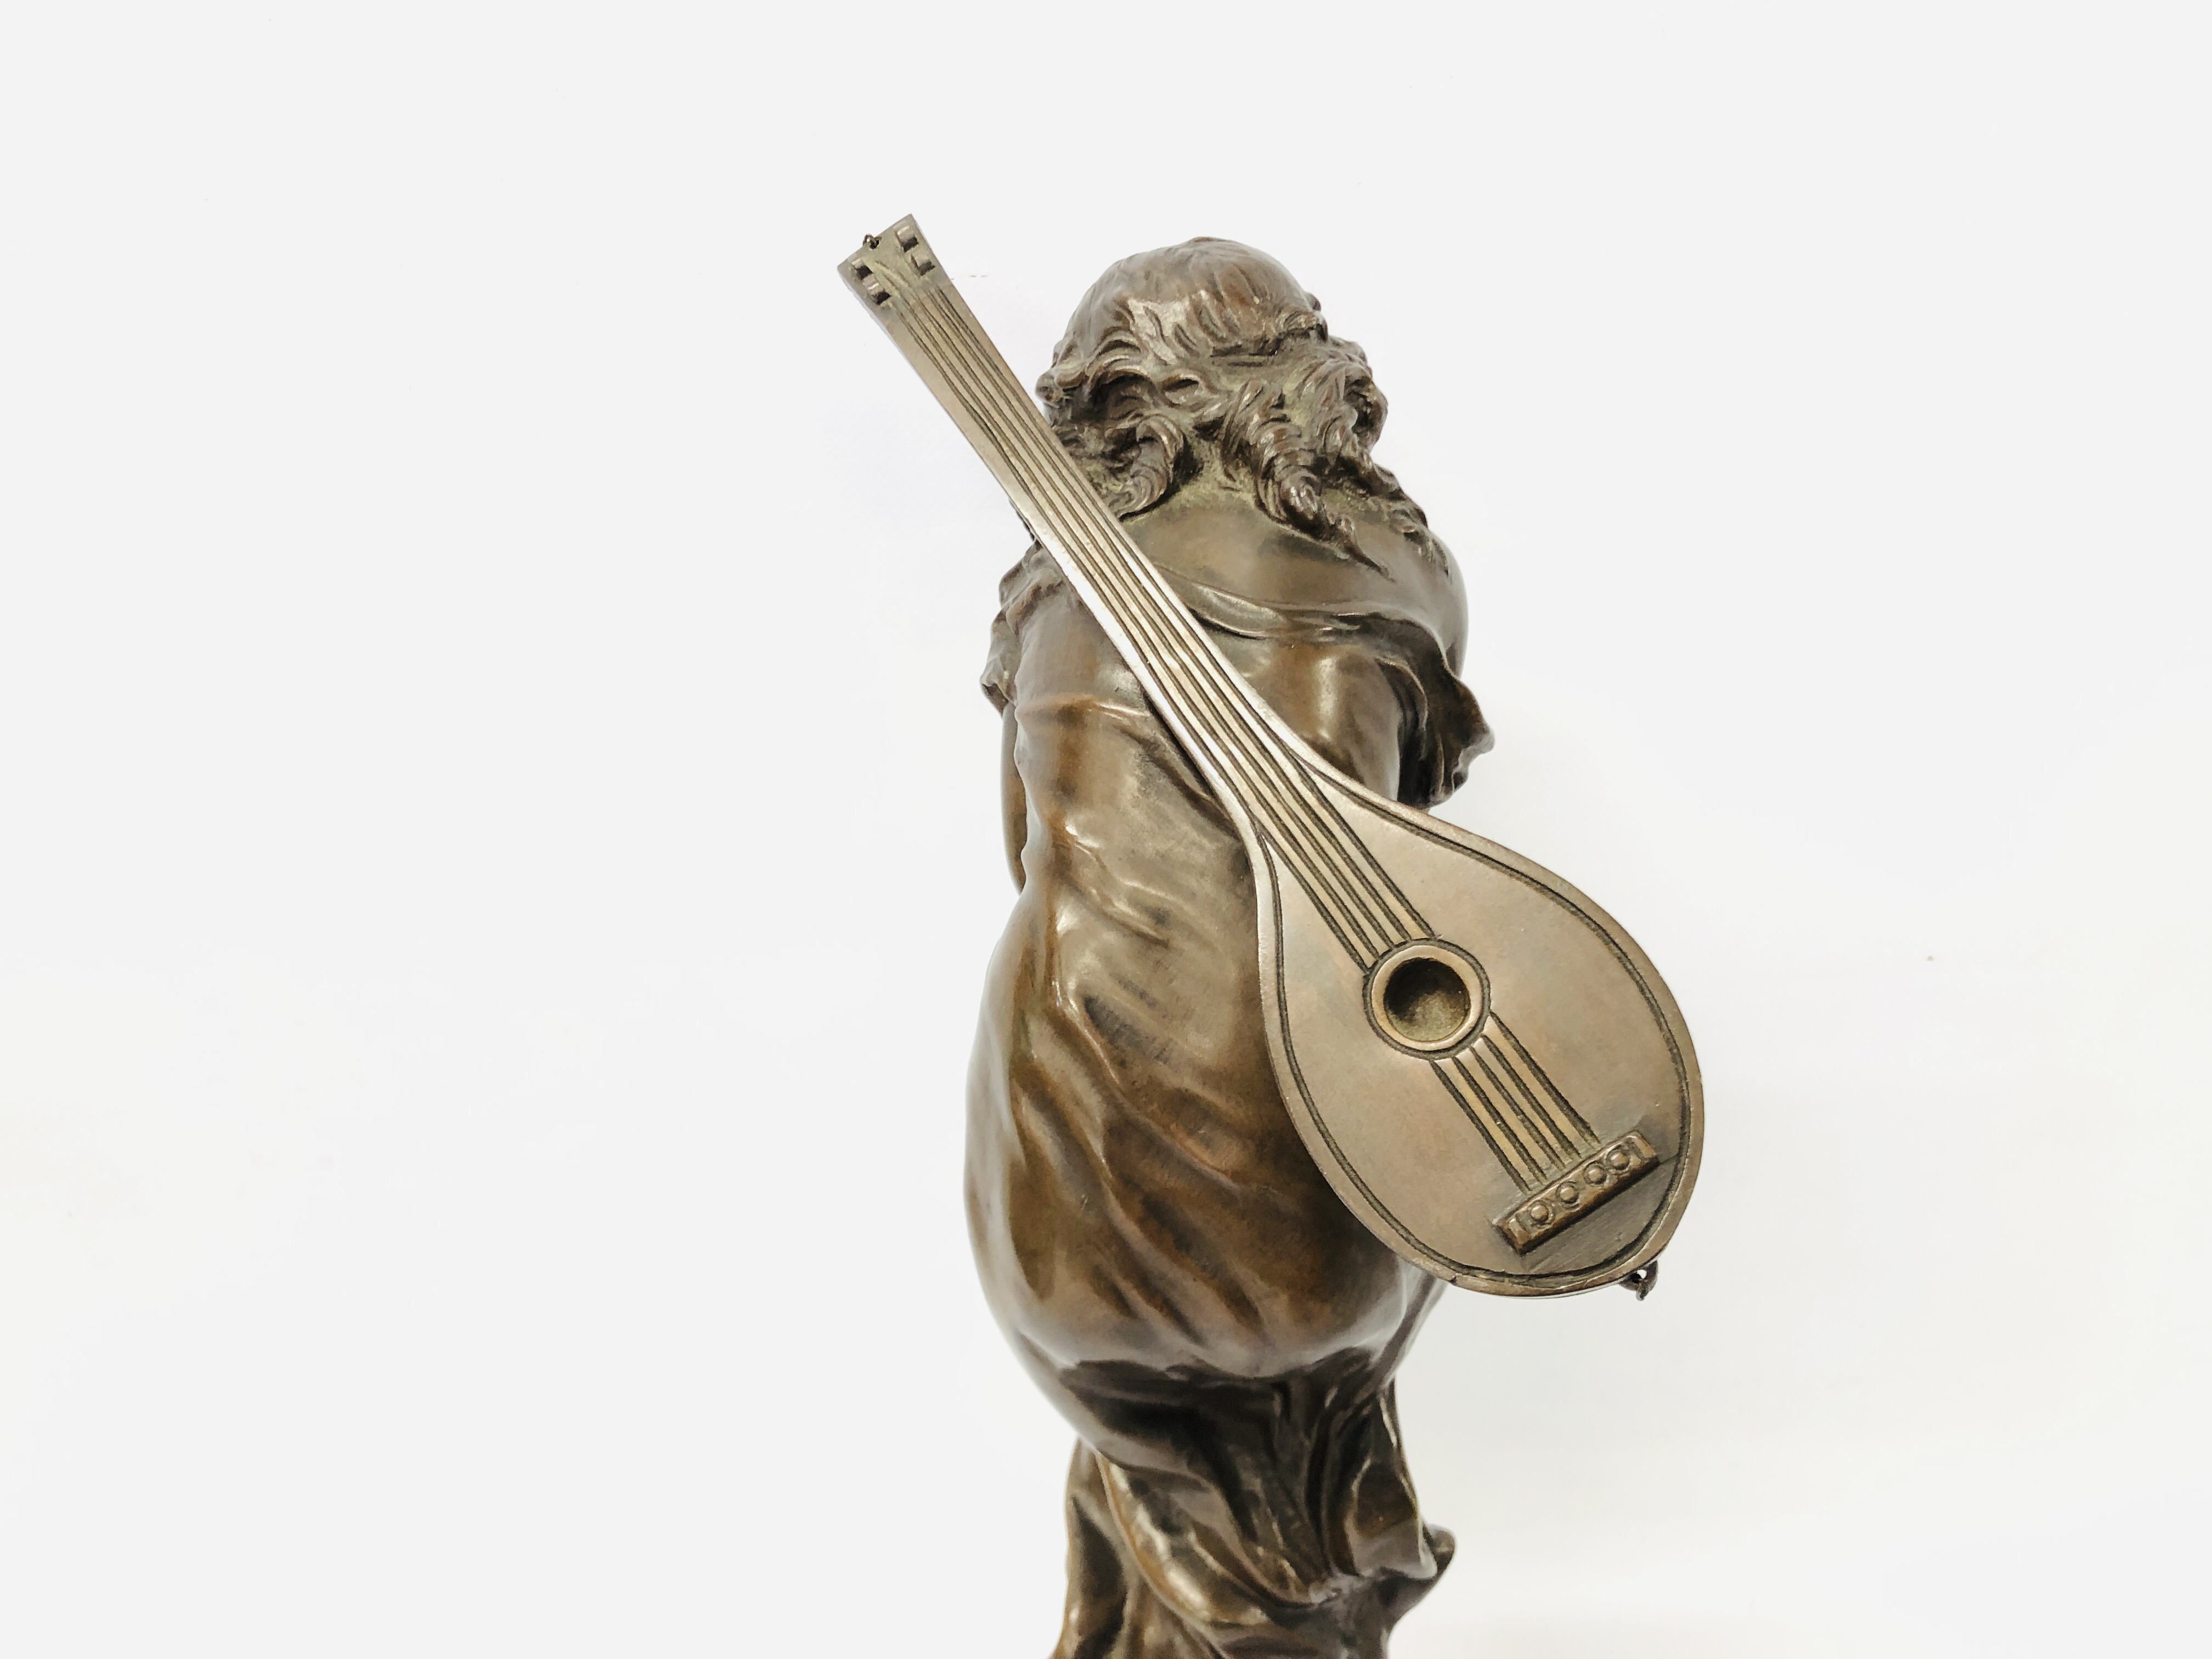 A FRENCH BRONZE OF A FEMALE LUTE PLAYER, THE BASE INSCRIBED "STELLA", - Image 7 of 10